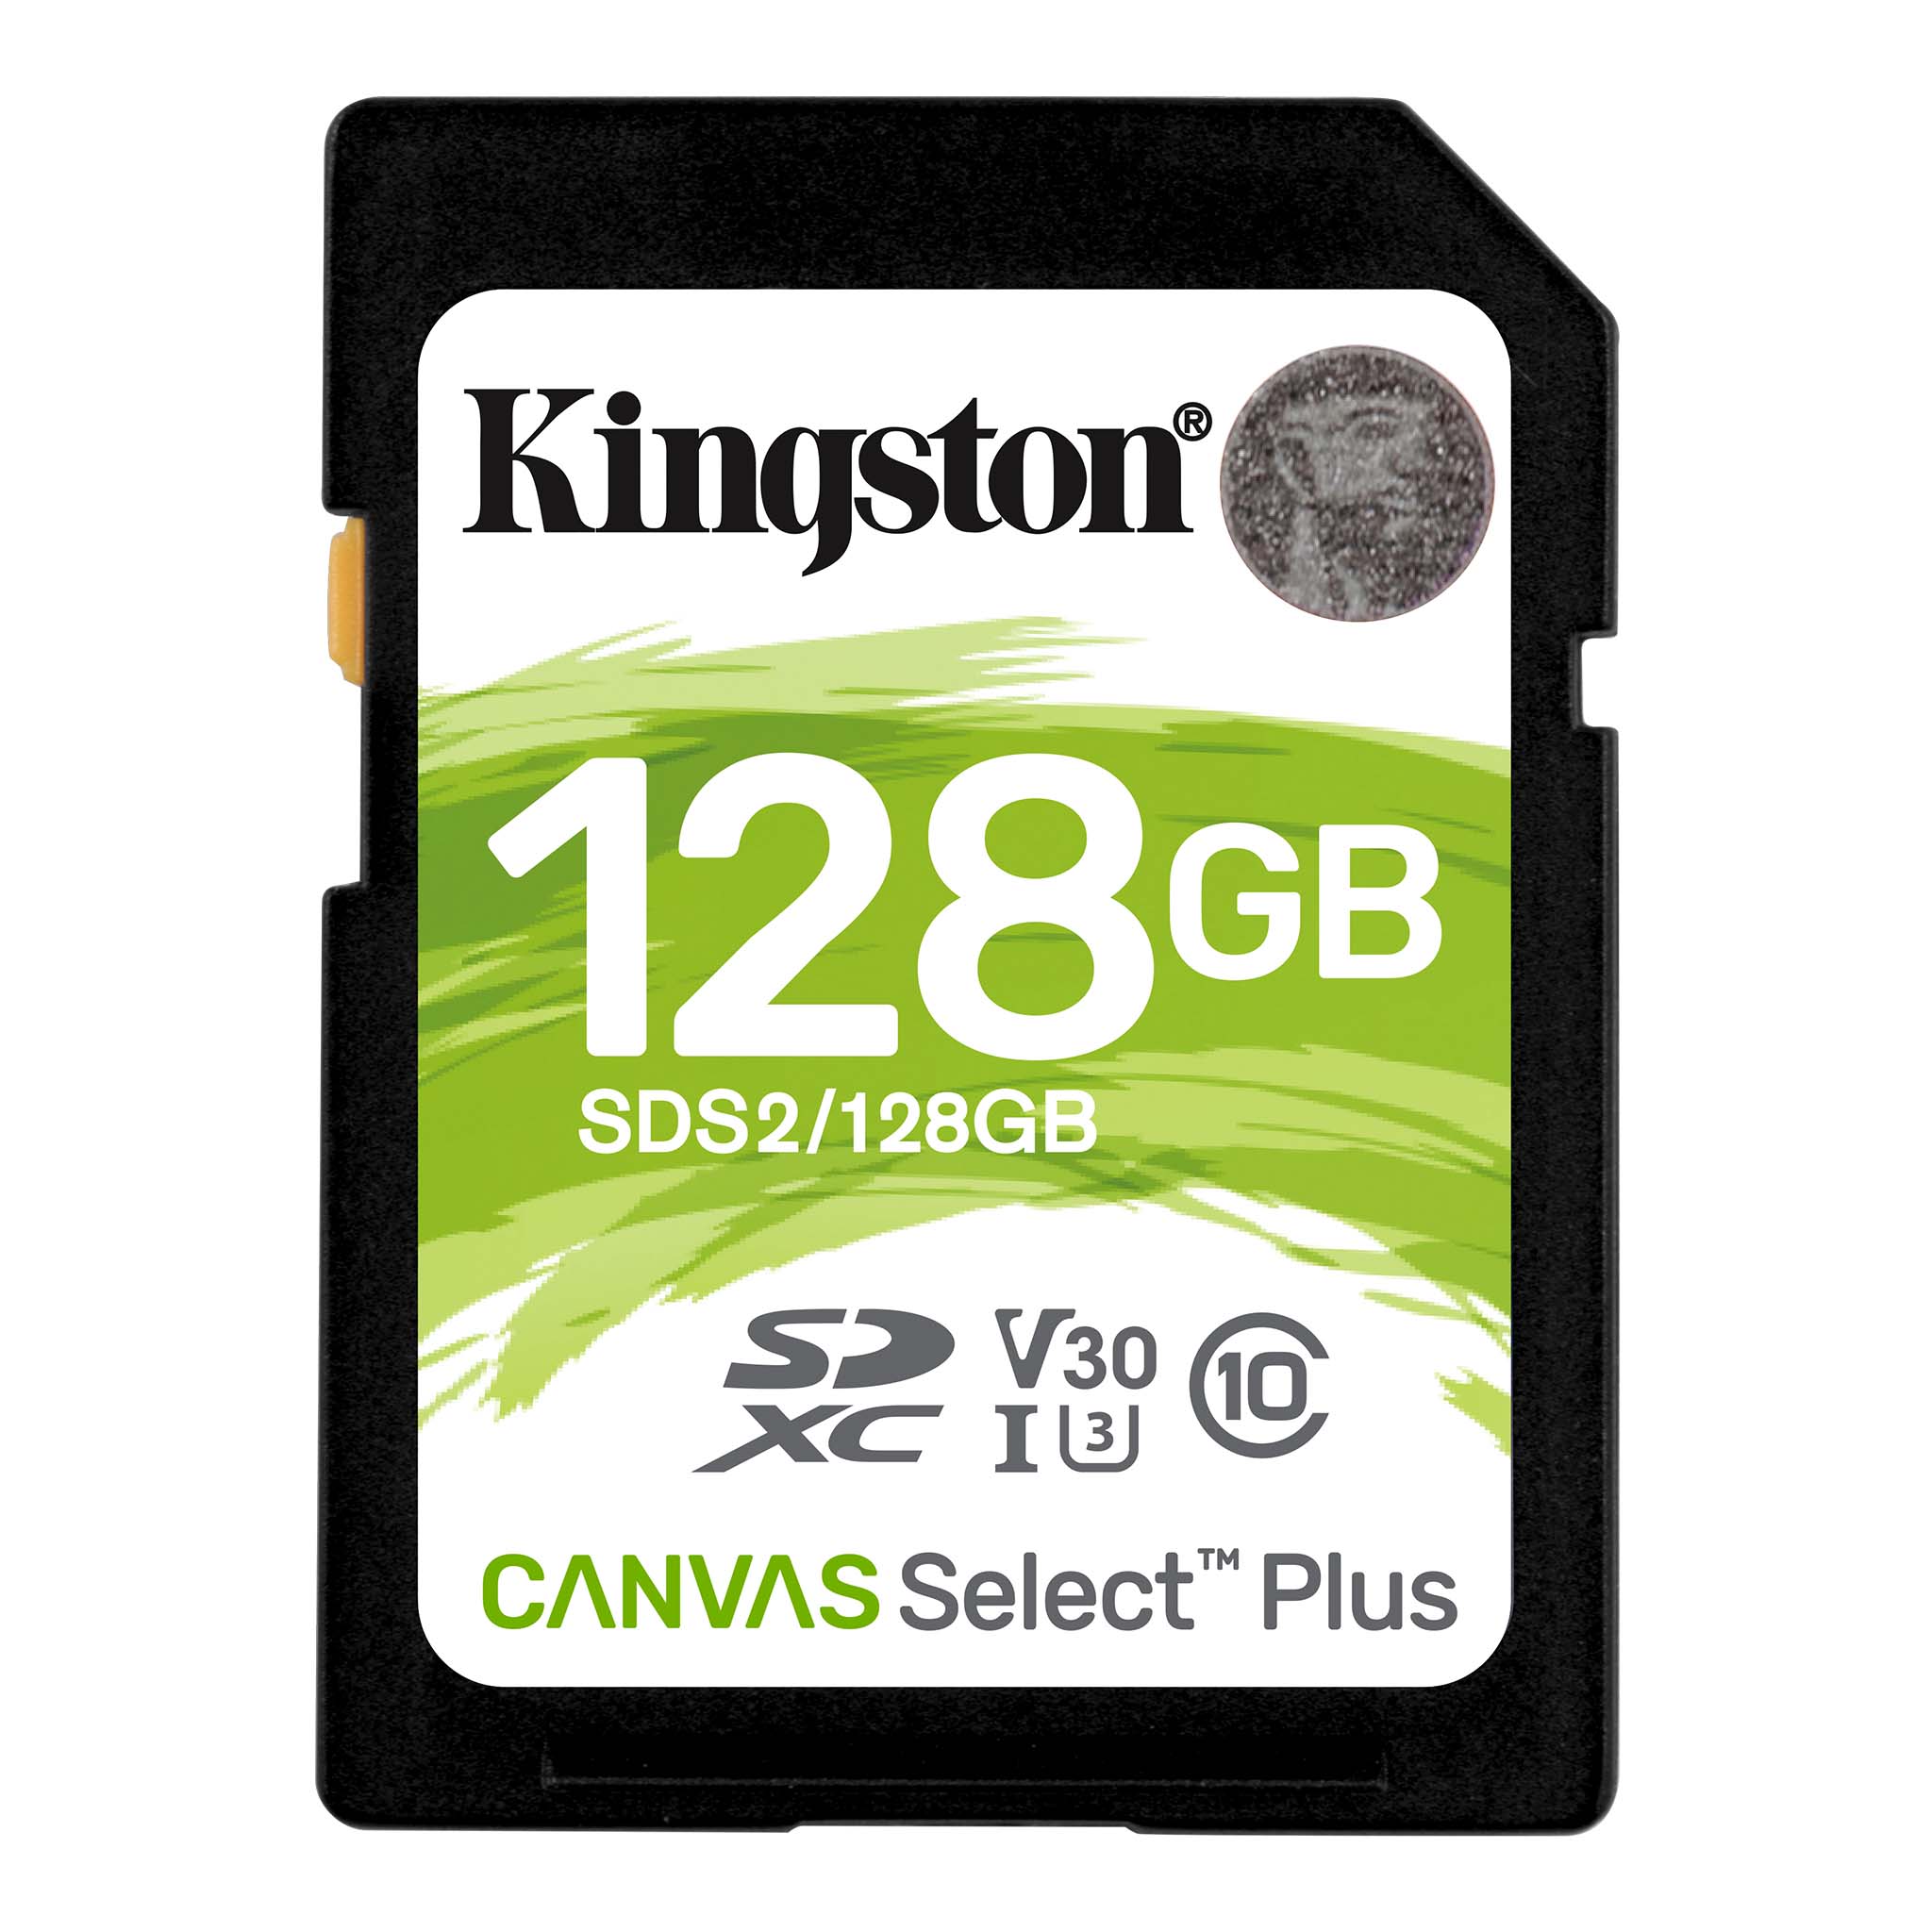 100MBs Works with Kingston Kingston 512GB Kyocera Hydro Wave MicroSDXC Canvas Select Plus Card Verified by SanFlash. 